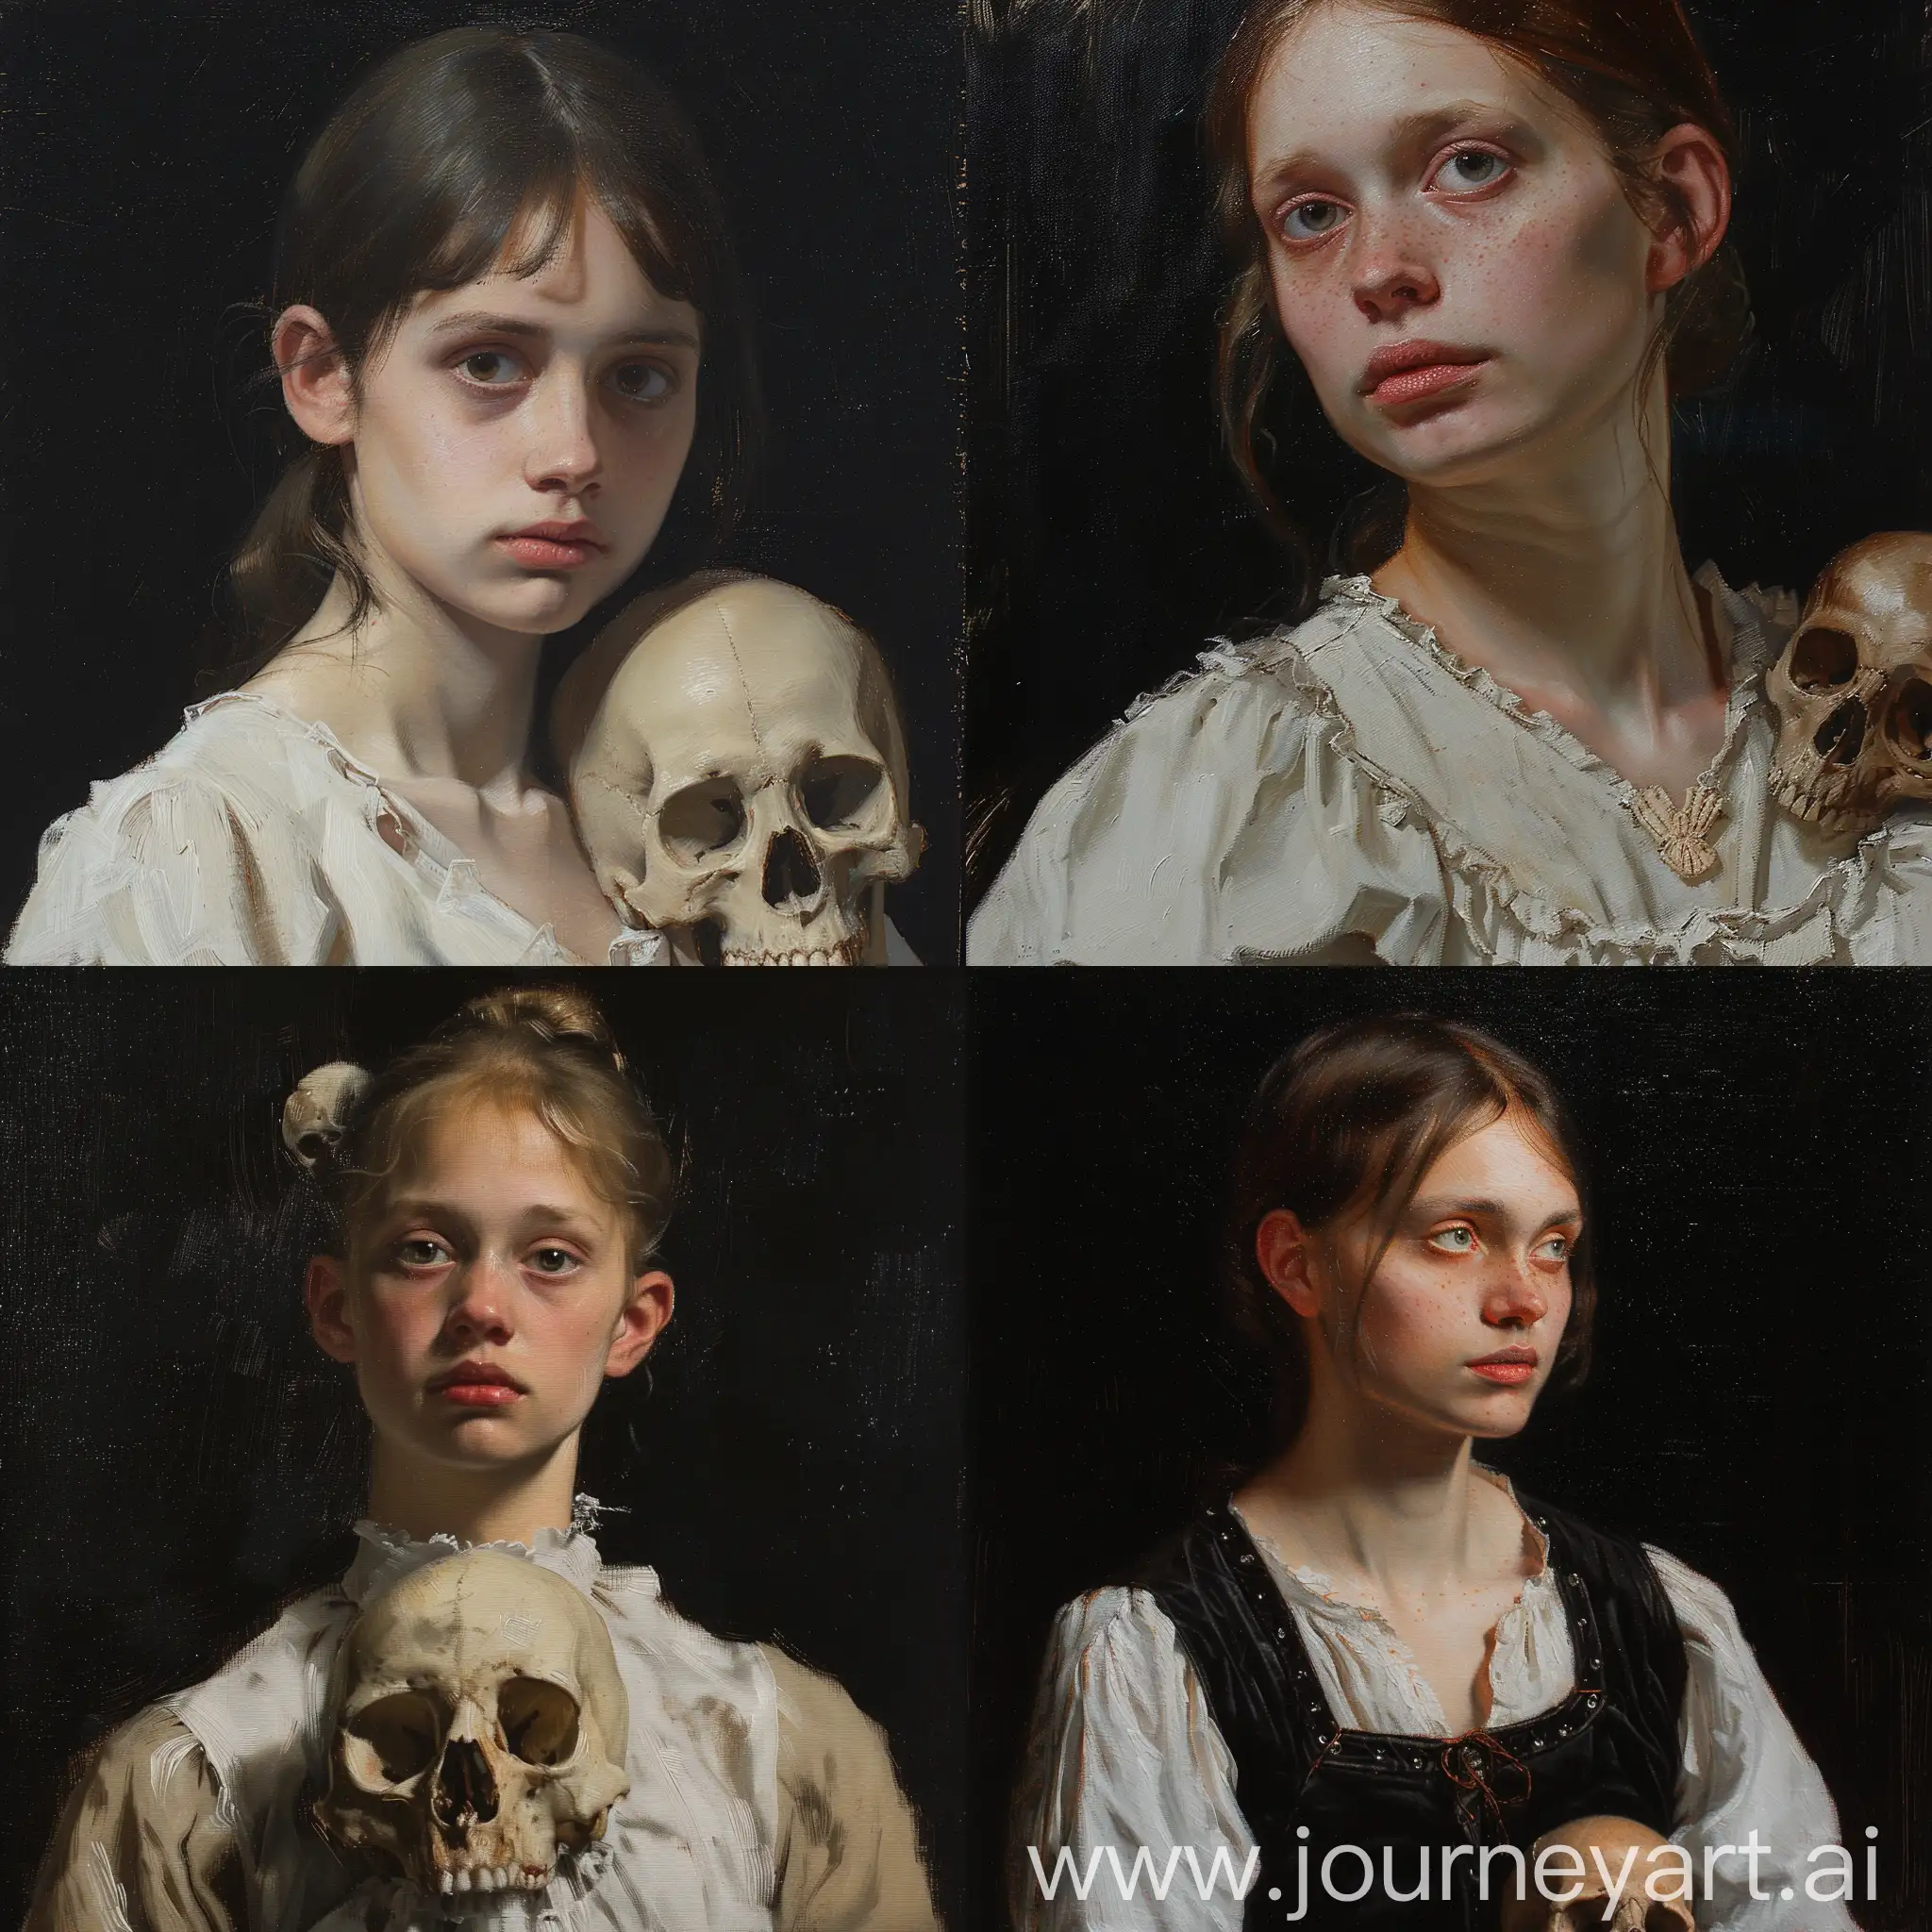 Oil sketch of a young woman with skull , wlop John singer Sargent, jeremy lipkin and rob rey, range murata jeremy lipking, John singer Sargent, black background, jeremy lipkin, lensculture portrait awards, casey baugh and james jean, detailed realism in painting, award-winning portrait, amazingly detailed oil painting